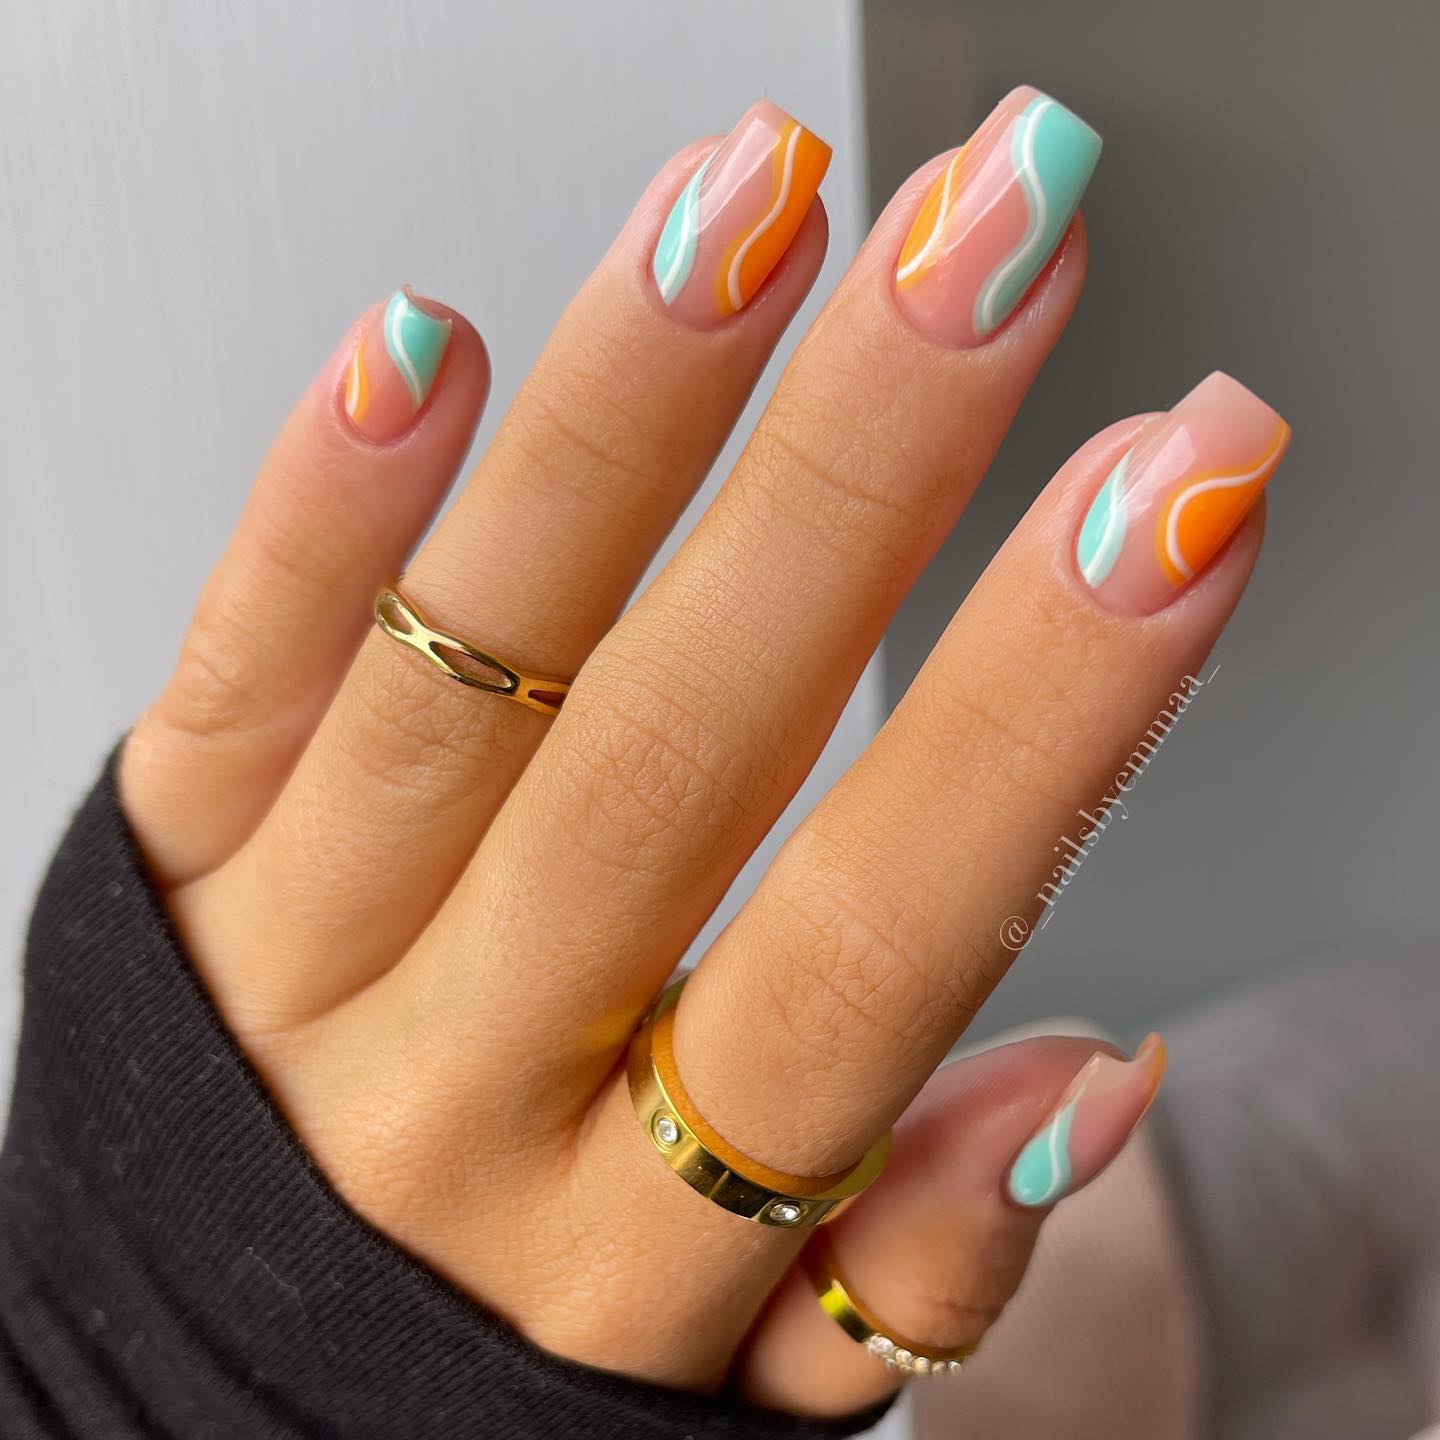 50 Best Nail Designs Trends To Try Out In 2022 images 2